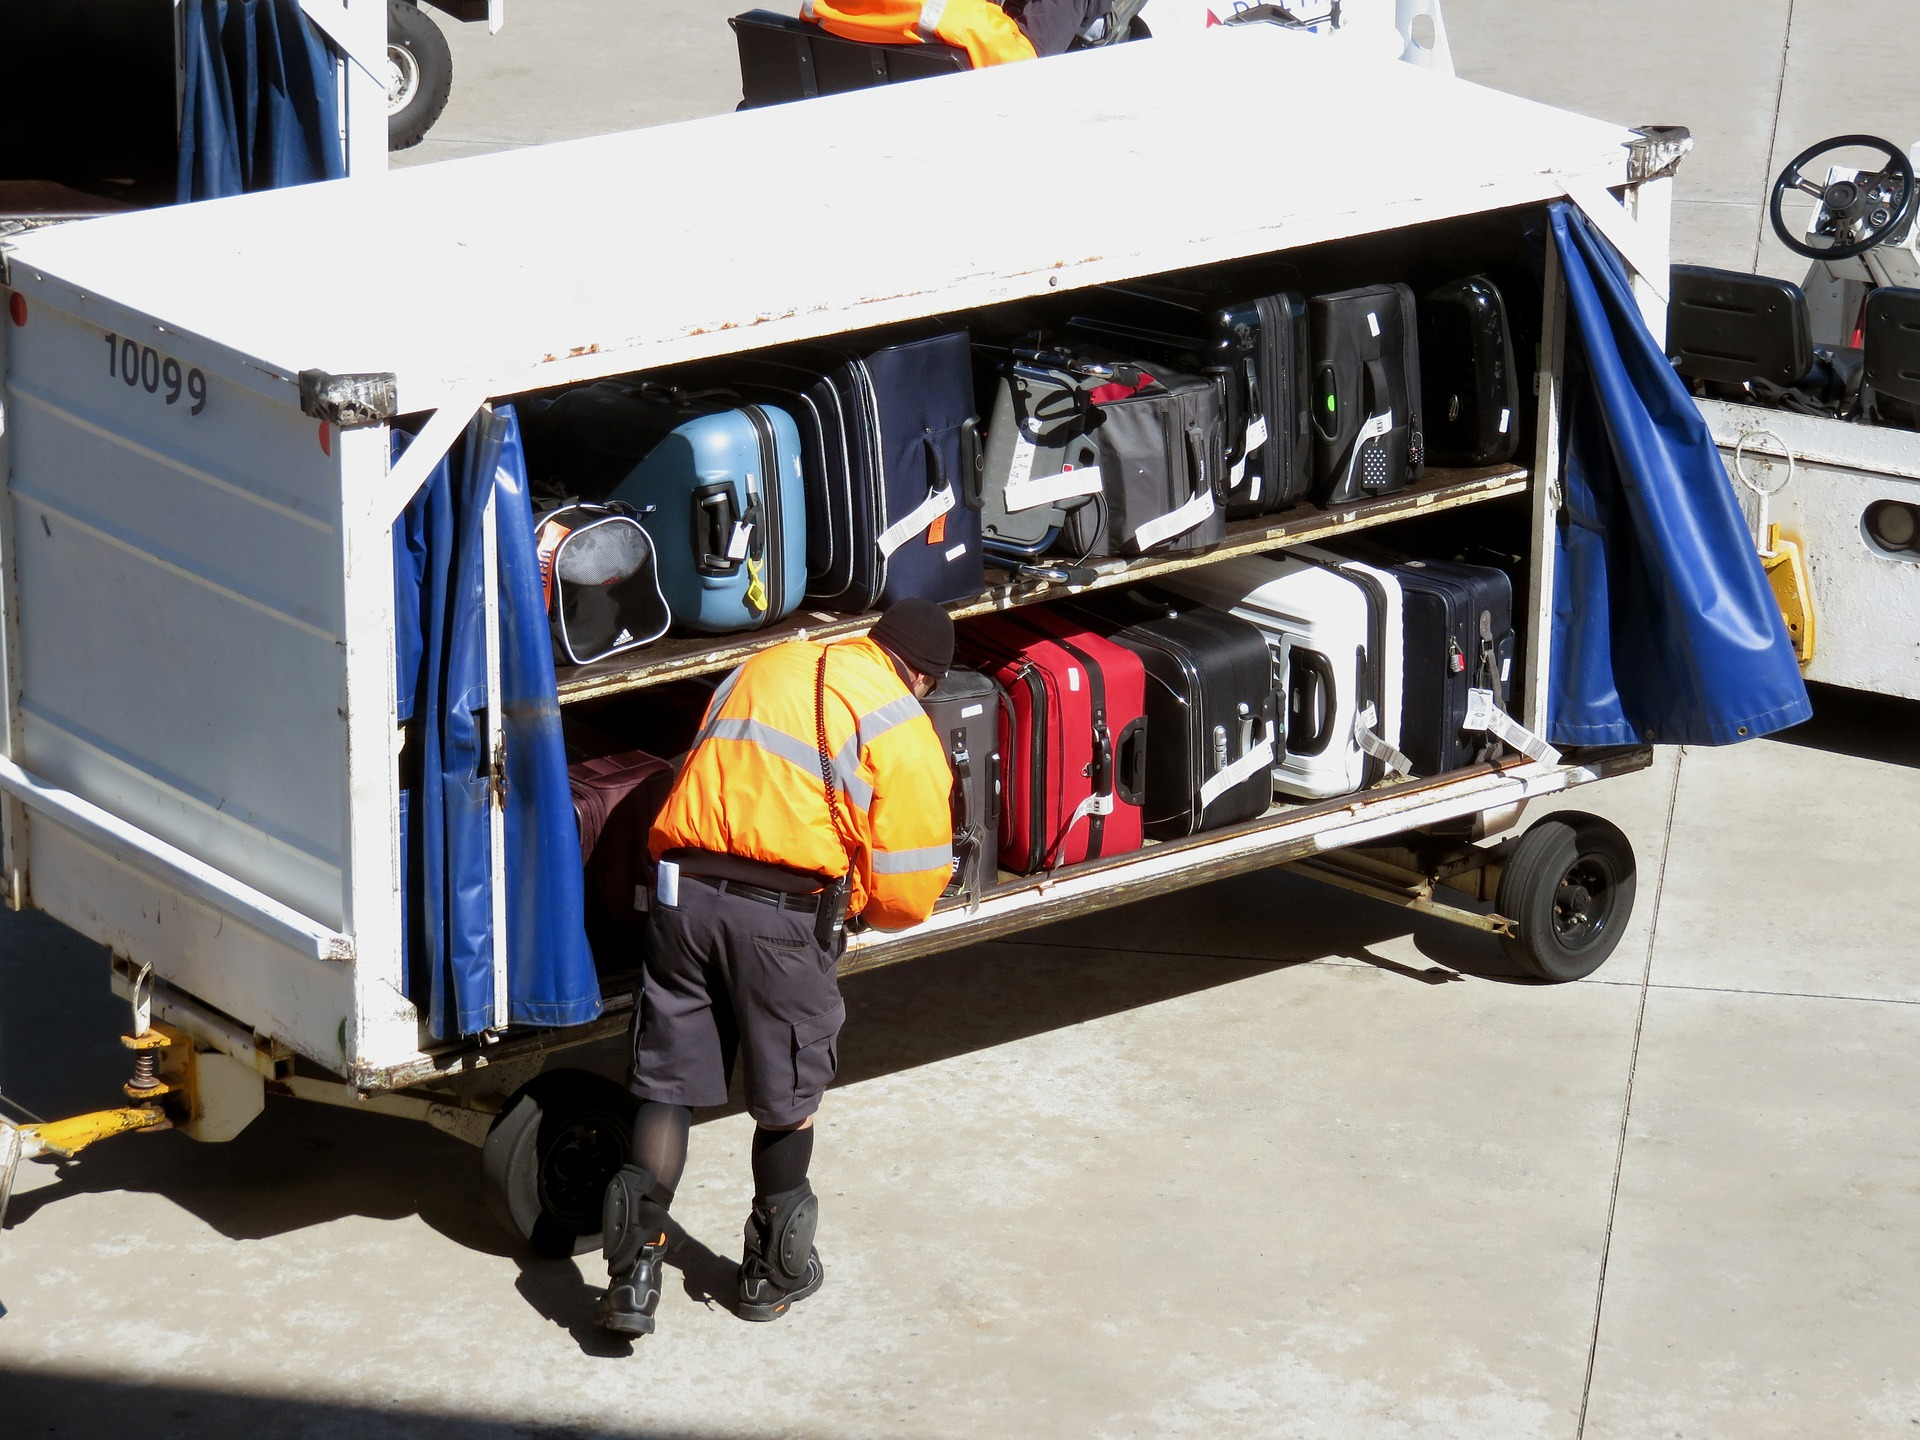 An airport worker arranging luggage to be loaded on an aircraft.